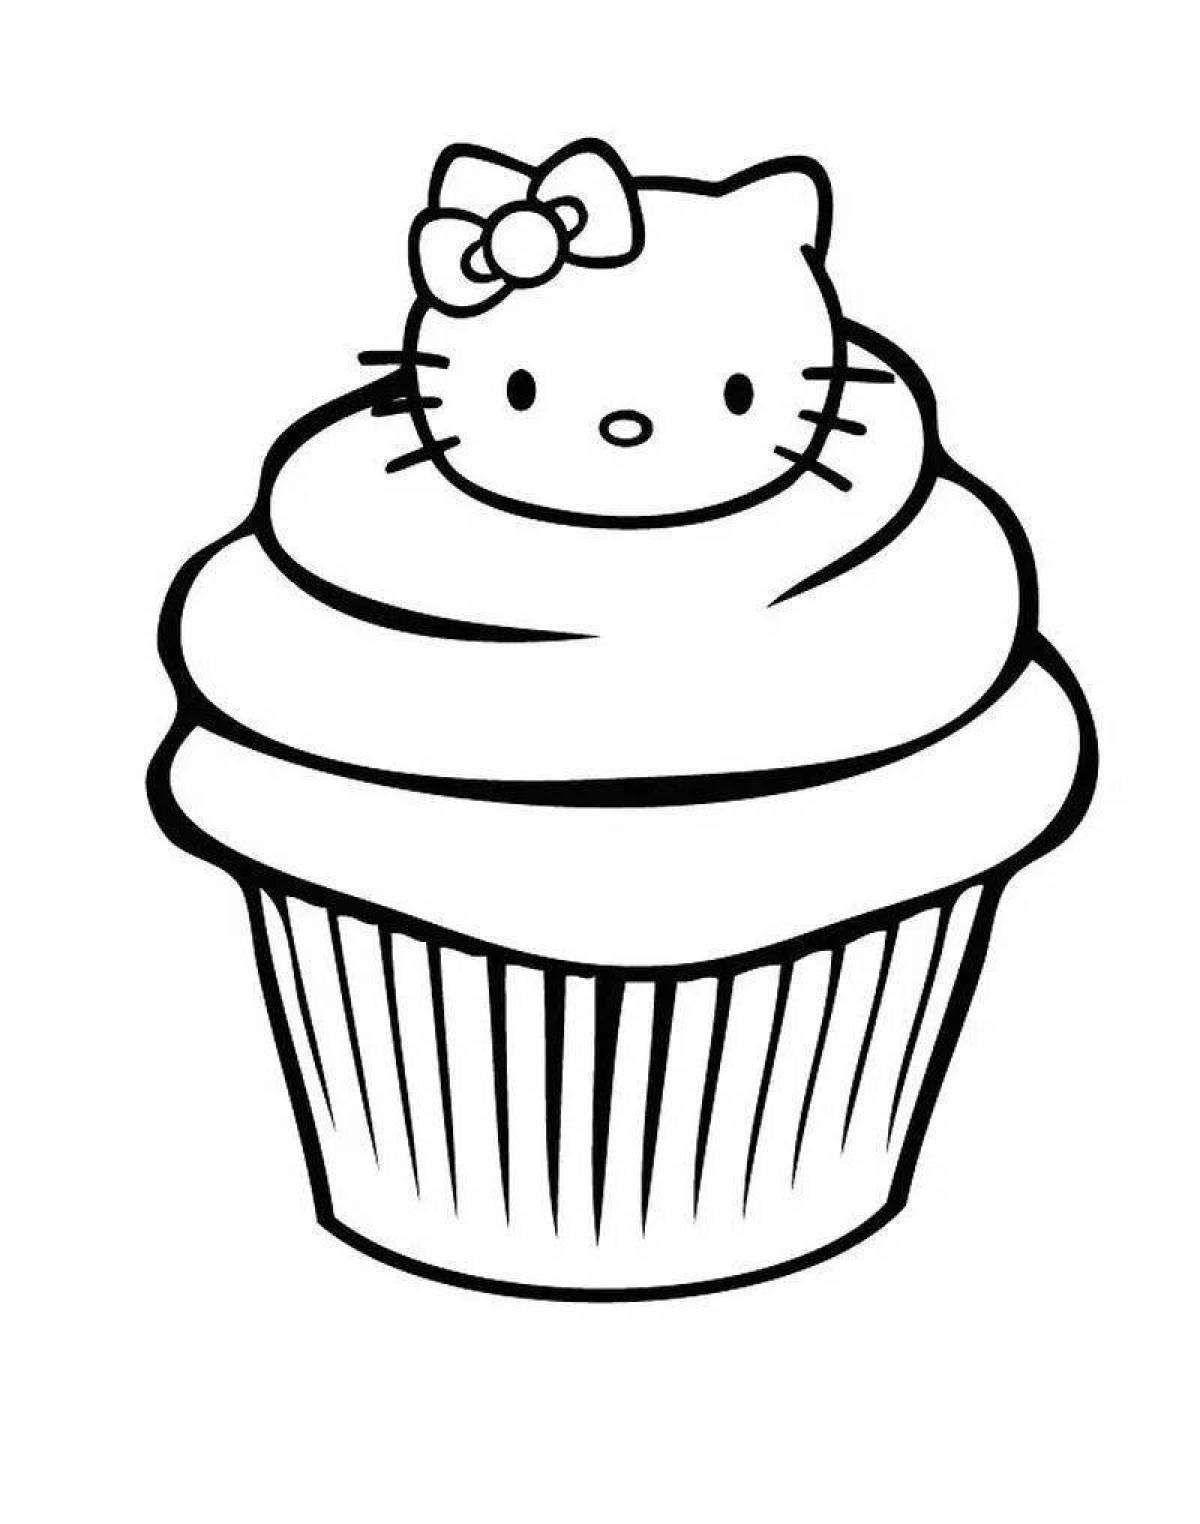 Creative cupcake coloring pages for kids